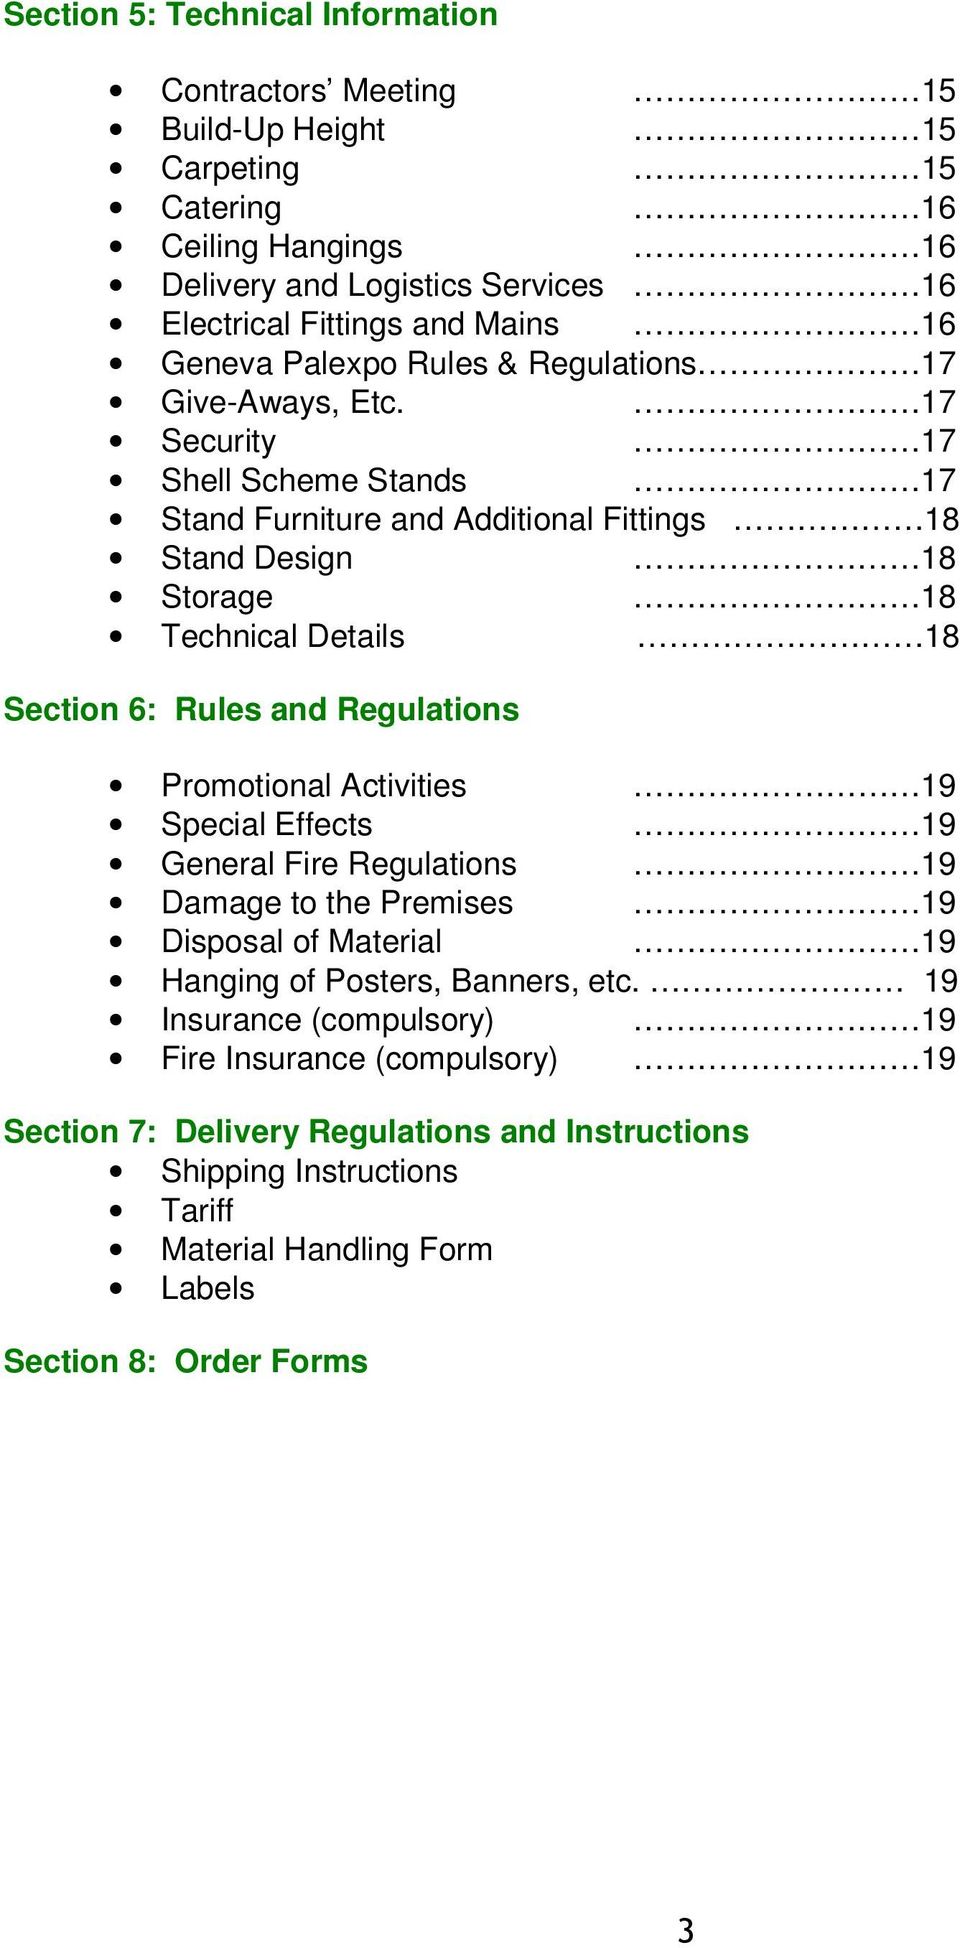 17 Security 17 Shell Scheme Stands 17 Stand Furniture and Additional Fittings 18 Stand Design 18 Storage 18 Technical Details 18 Section 6: Rules and Regulations Promotional Activities 19